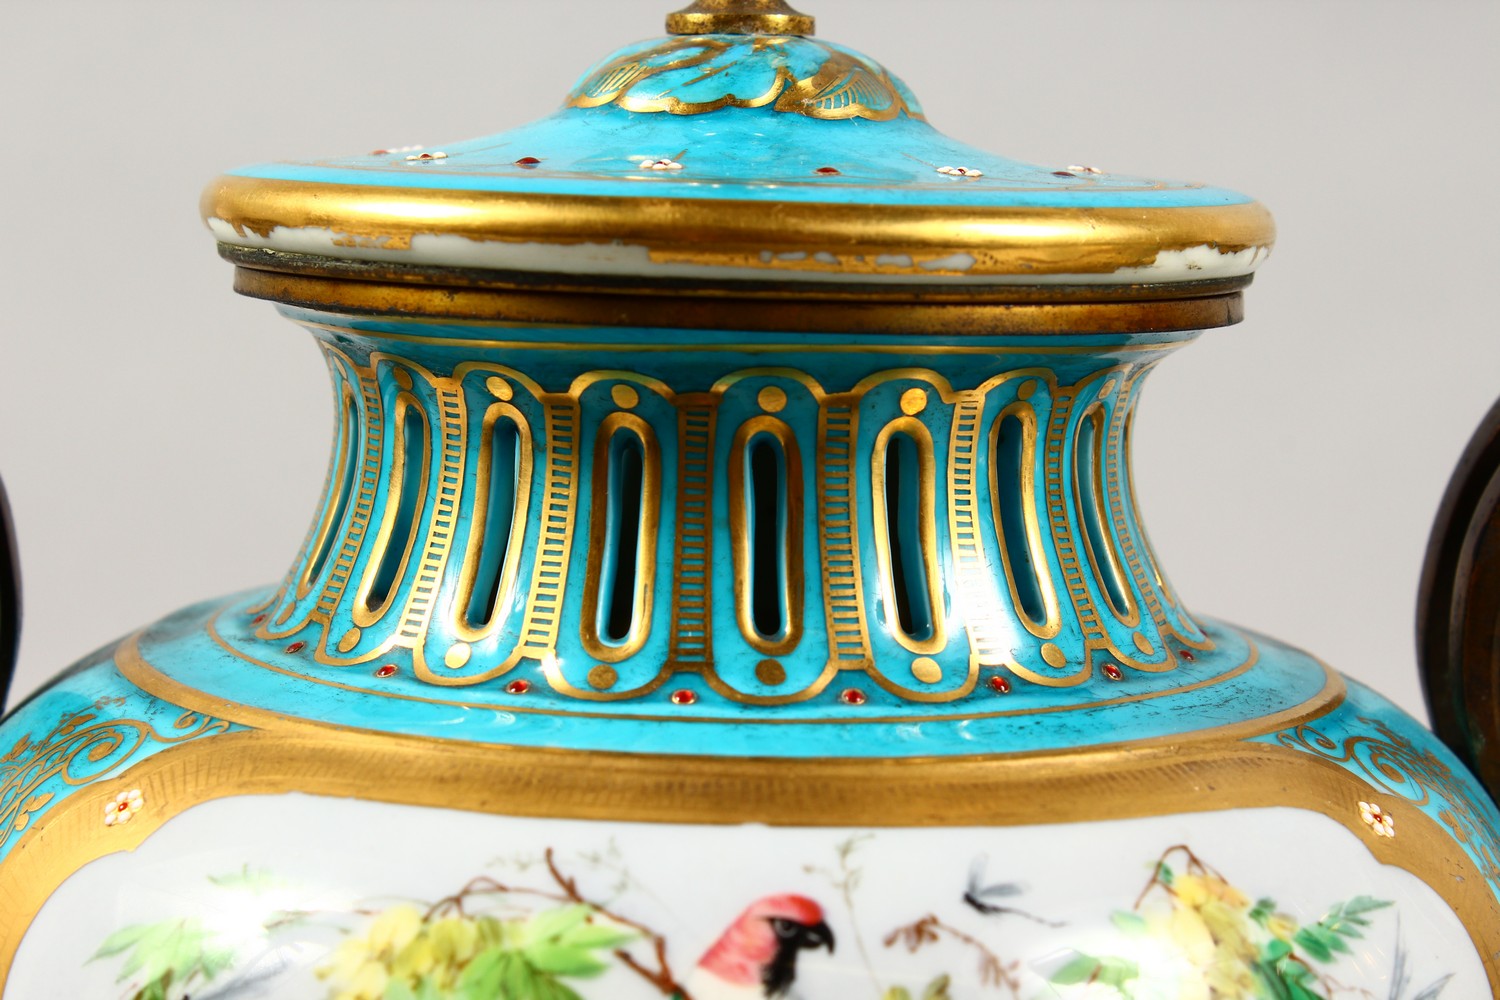 A SUPERB PAIR OF 19TH CENTURY SEVRES PORCELAIN URNS AND COVERS, pale blue ground, painted with - Image 4 of 14